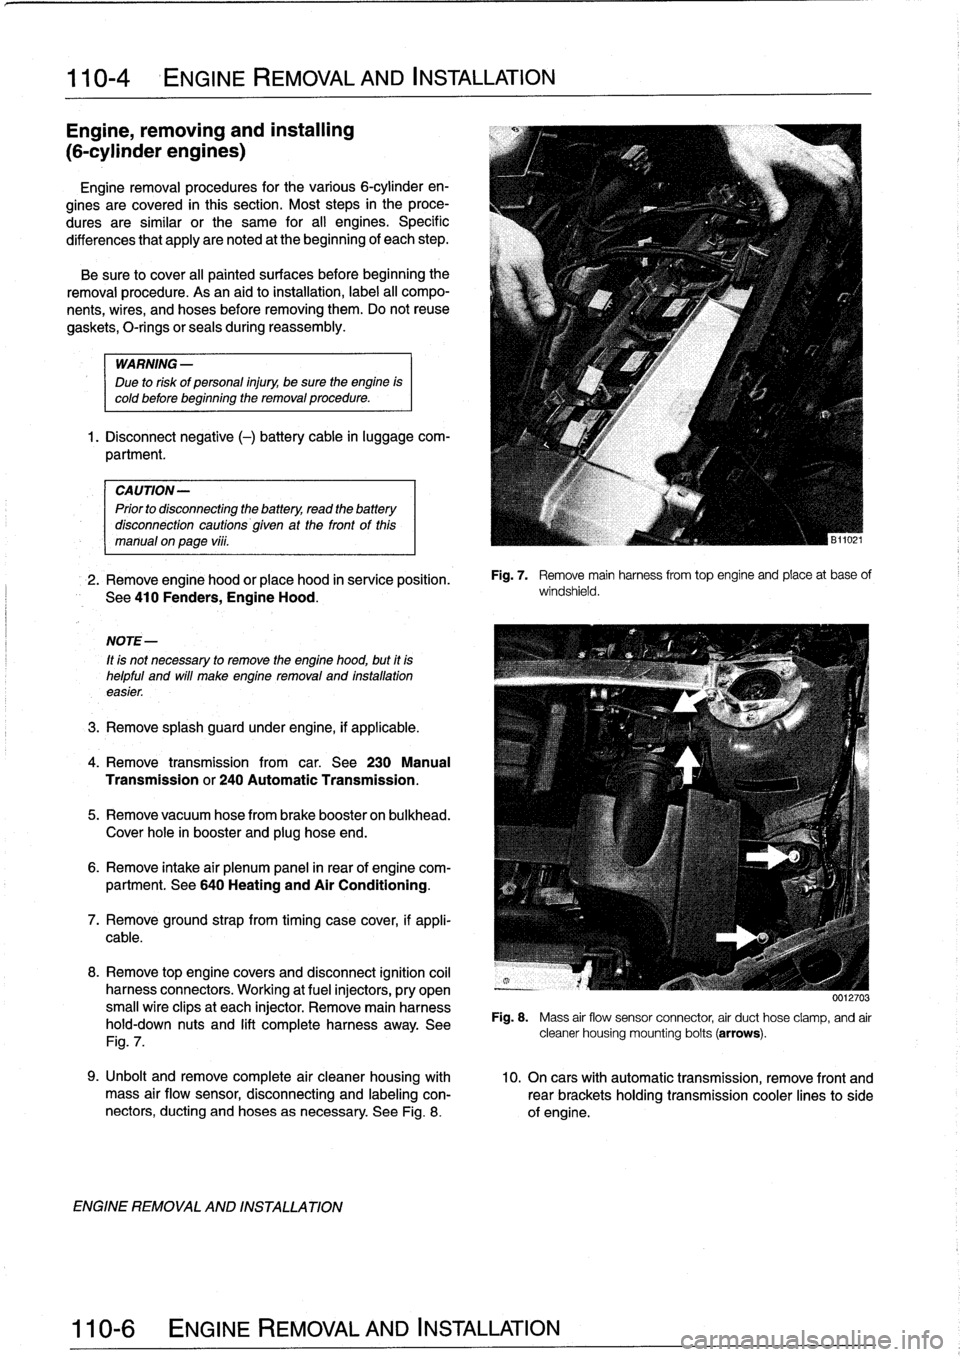 BMW 318i 1997 E36 Workshop Manual 
110-
4

	

ENGINE
REMOVAL
AND
INSTALLATION

Engine,
removing
and
installing

(6-cylinder
engines)

Engineremoval
procedures
for
the
various
6-cylinder
en-

gines
arecovered
in
this
section
.
Most
ste